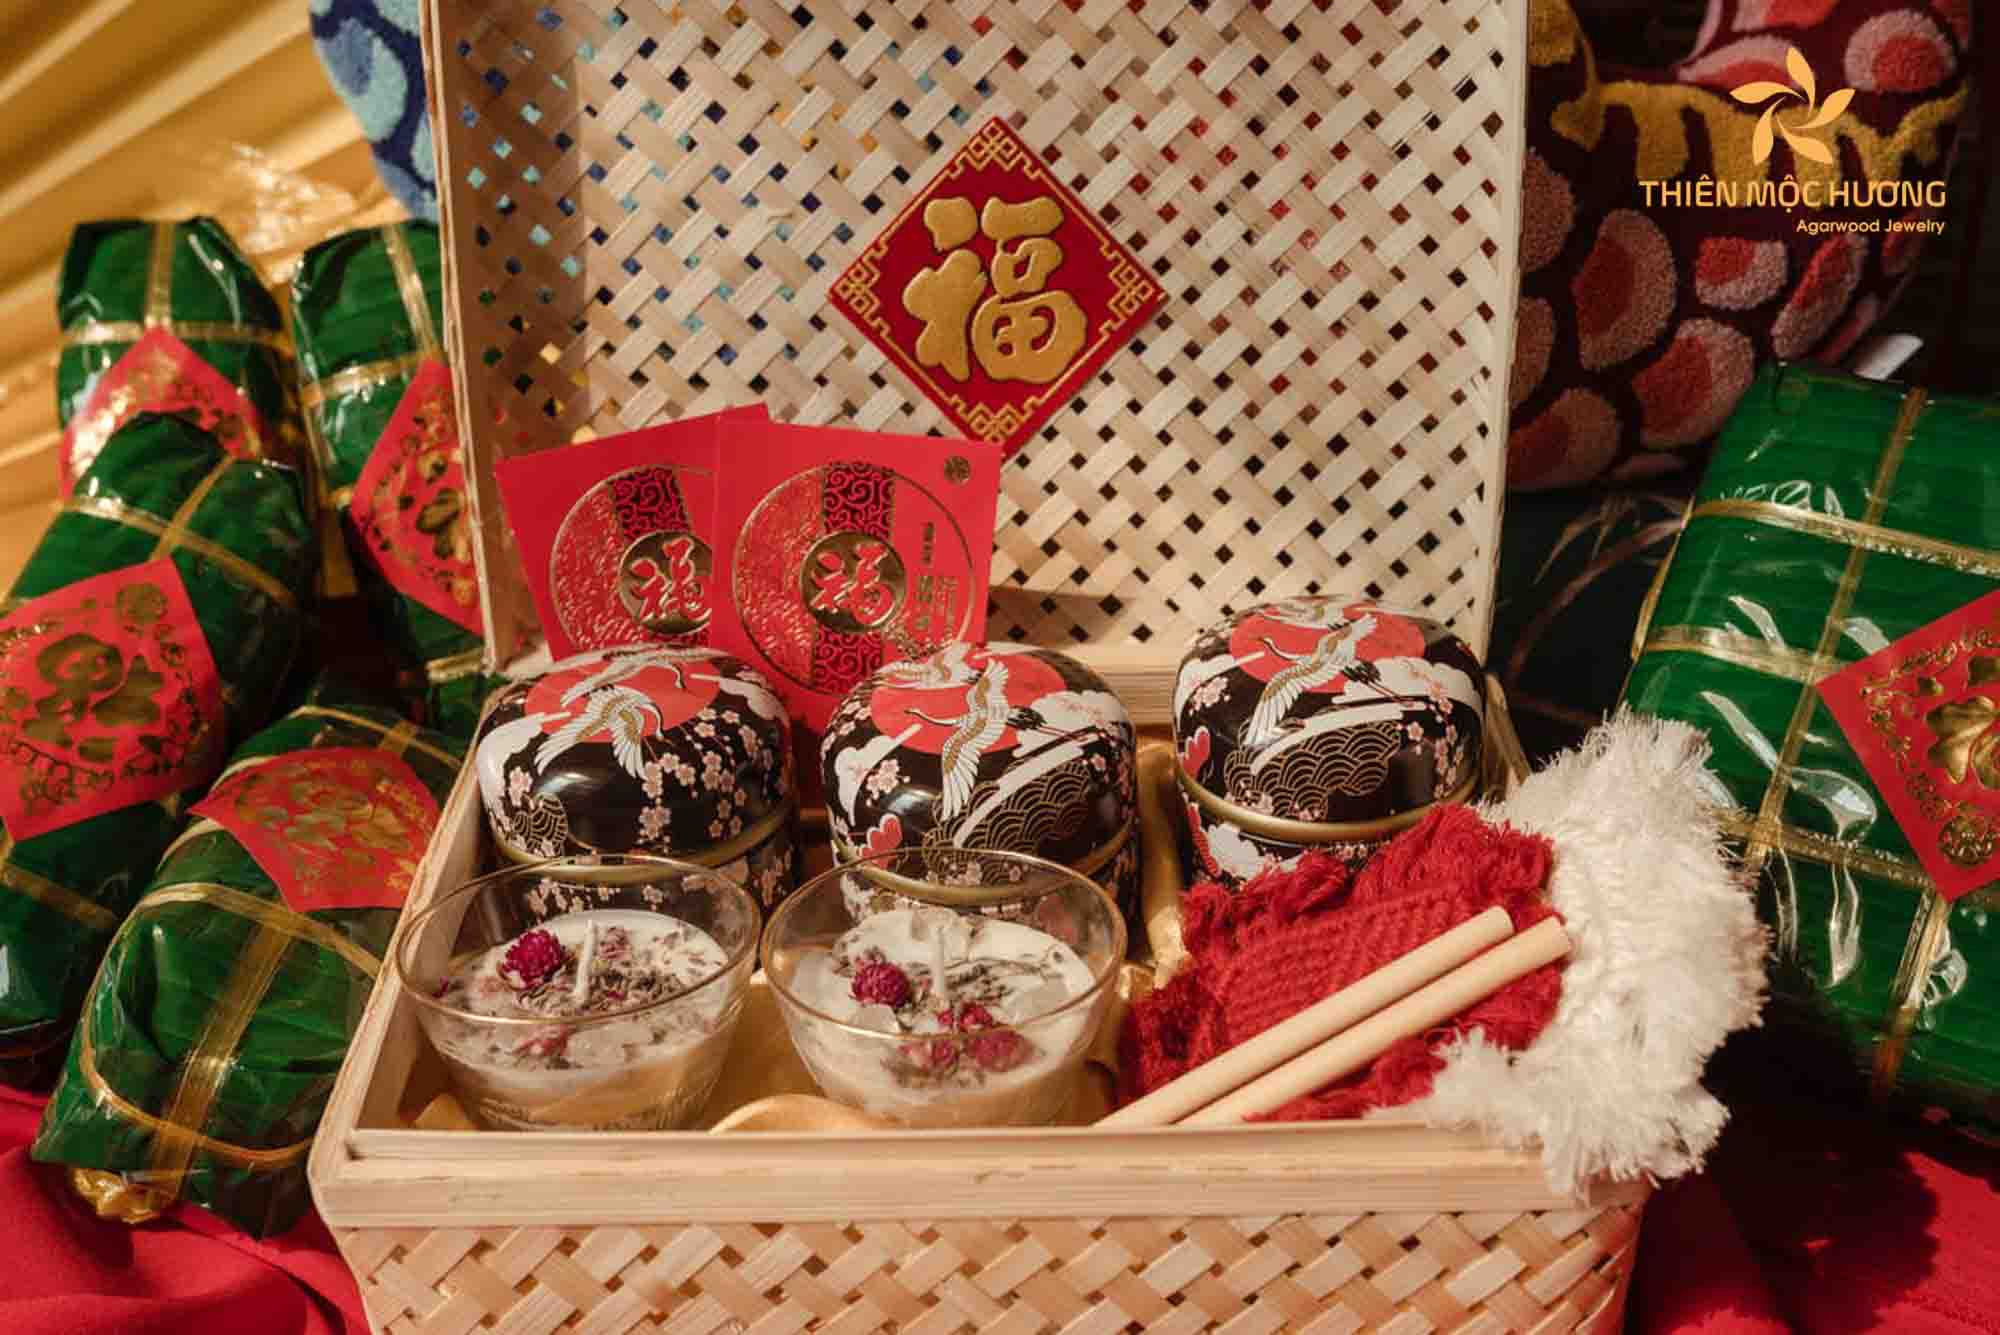 The Meaning Behind Tet Gifts